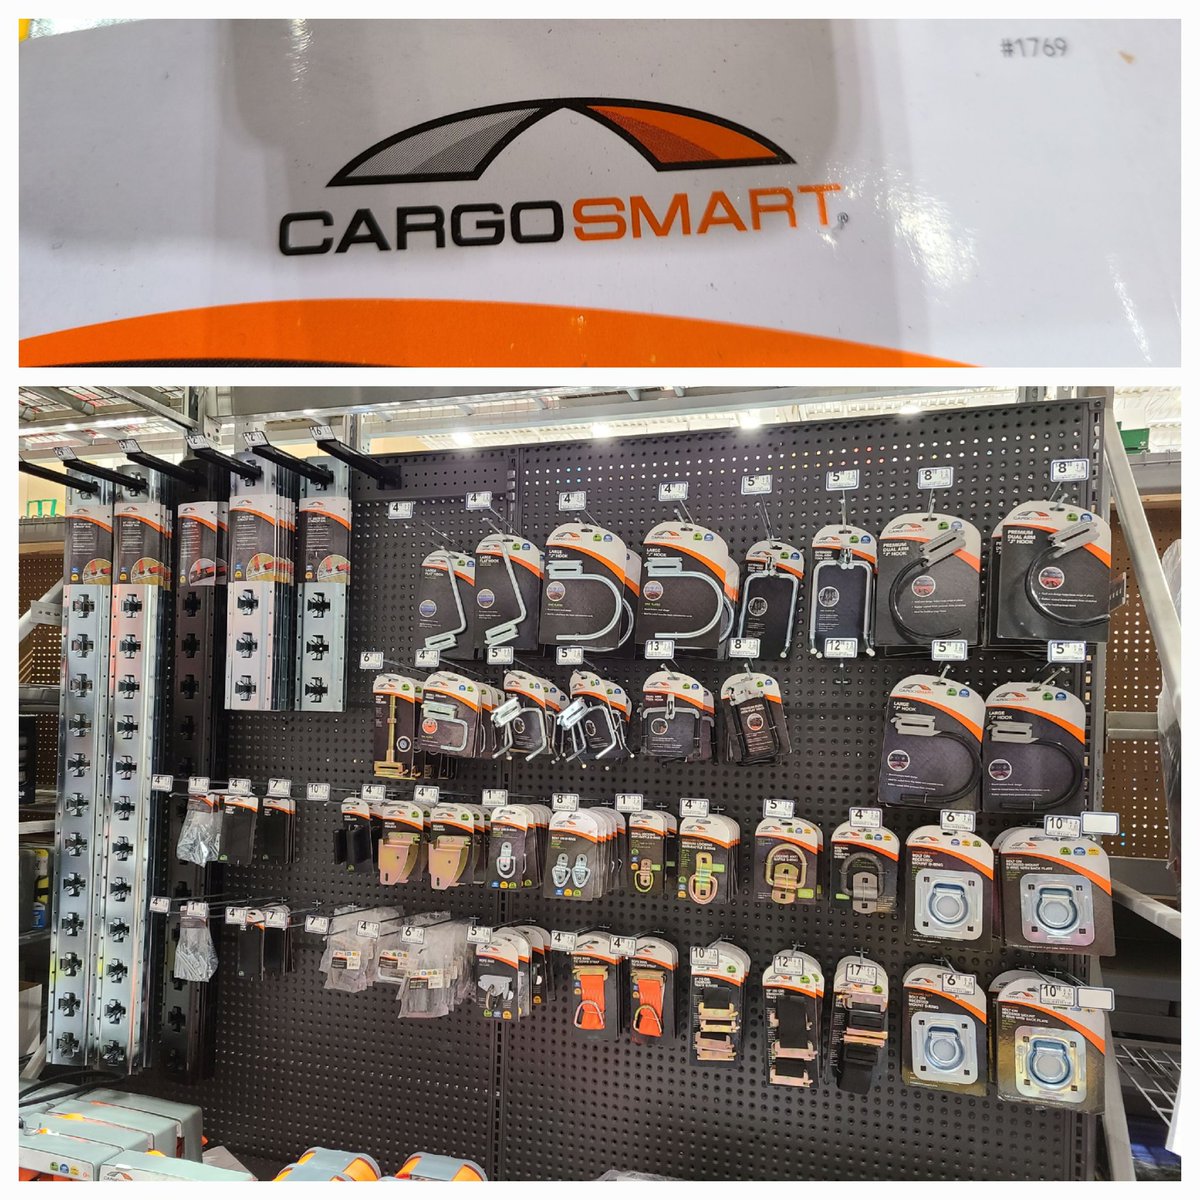 Weekend-ing at 2918 spotlights our new line of Trailer & Garage Organization products from CargoSmart! Shout-outs to ASM Jude and DS Mike for the execution!
#runtheplay #weekending #lowesRVA #newproductdemo #D899strong
@BlueBoxR1 @BenitoKomadina @steveyoung456 @CharlesSt73